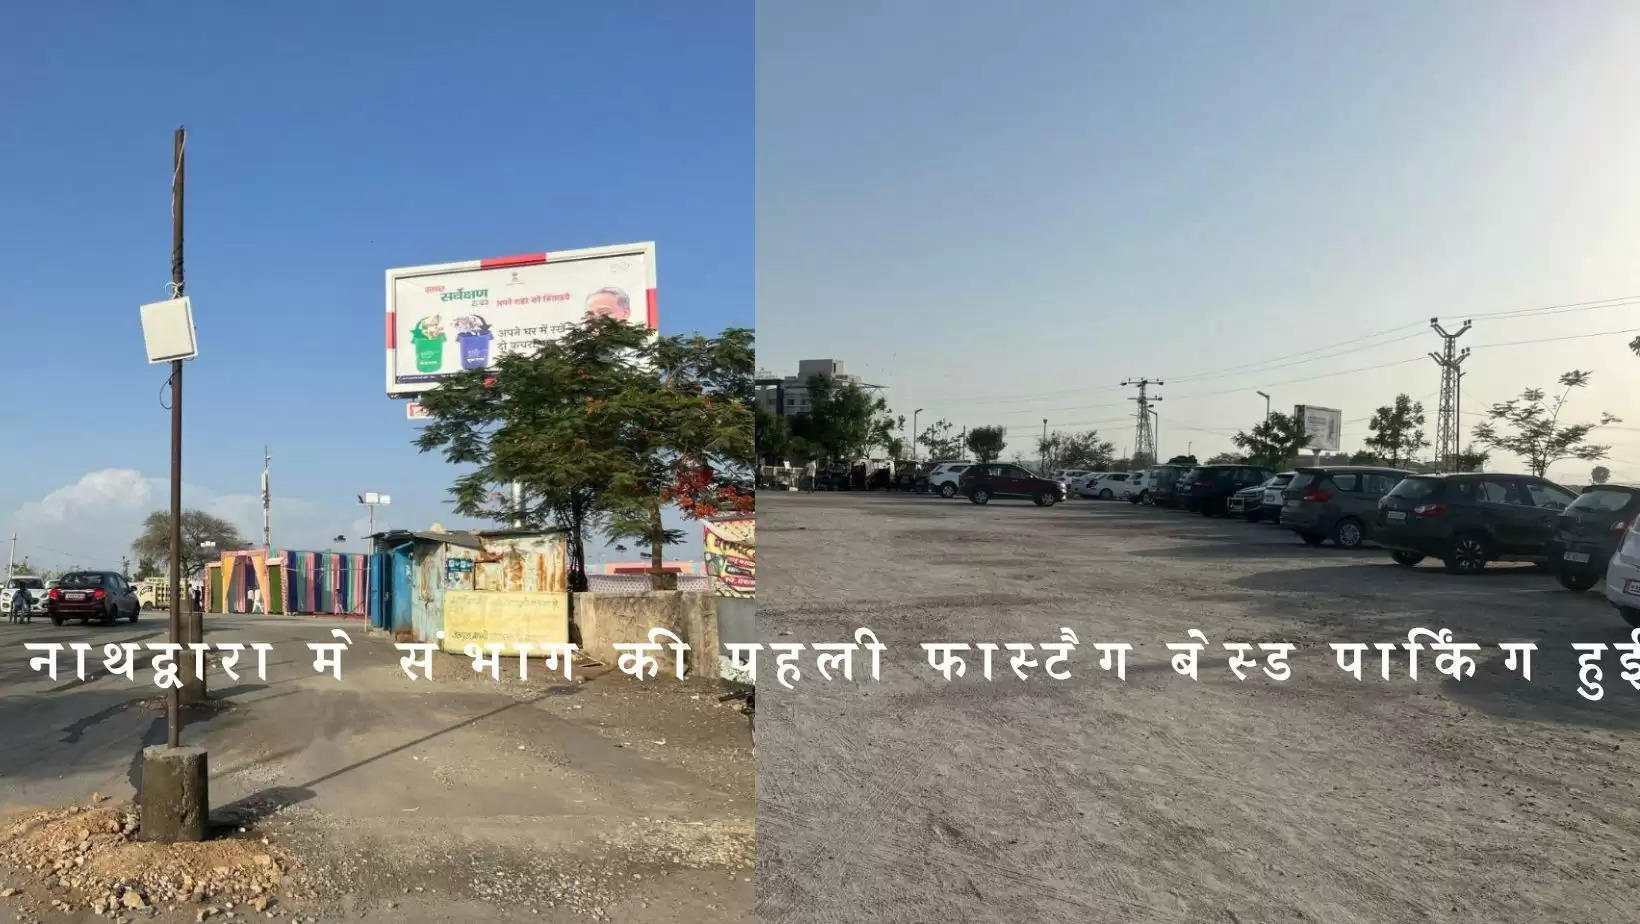 Nathdwara - Udaipur divisions first Fastag Based Parking opens in Nathdwara